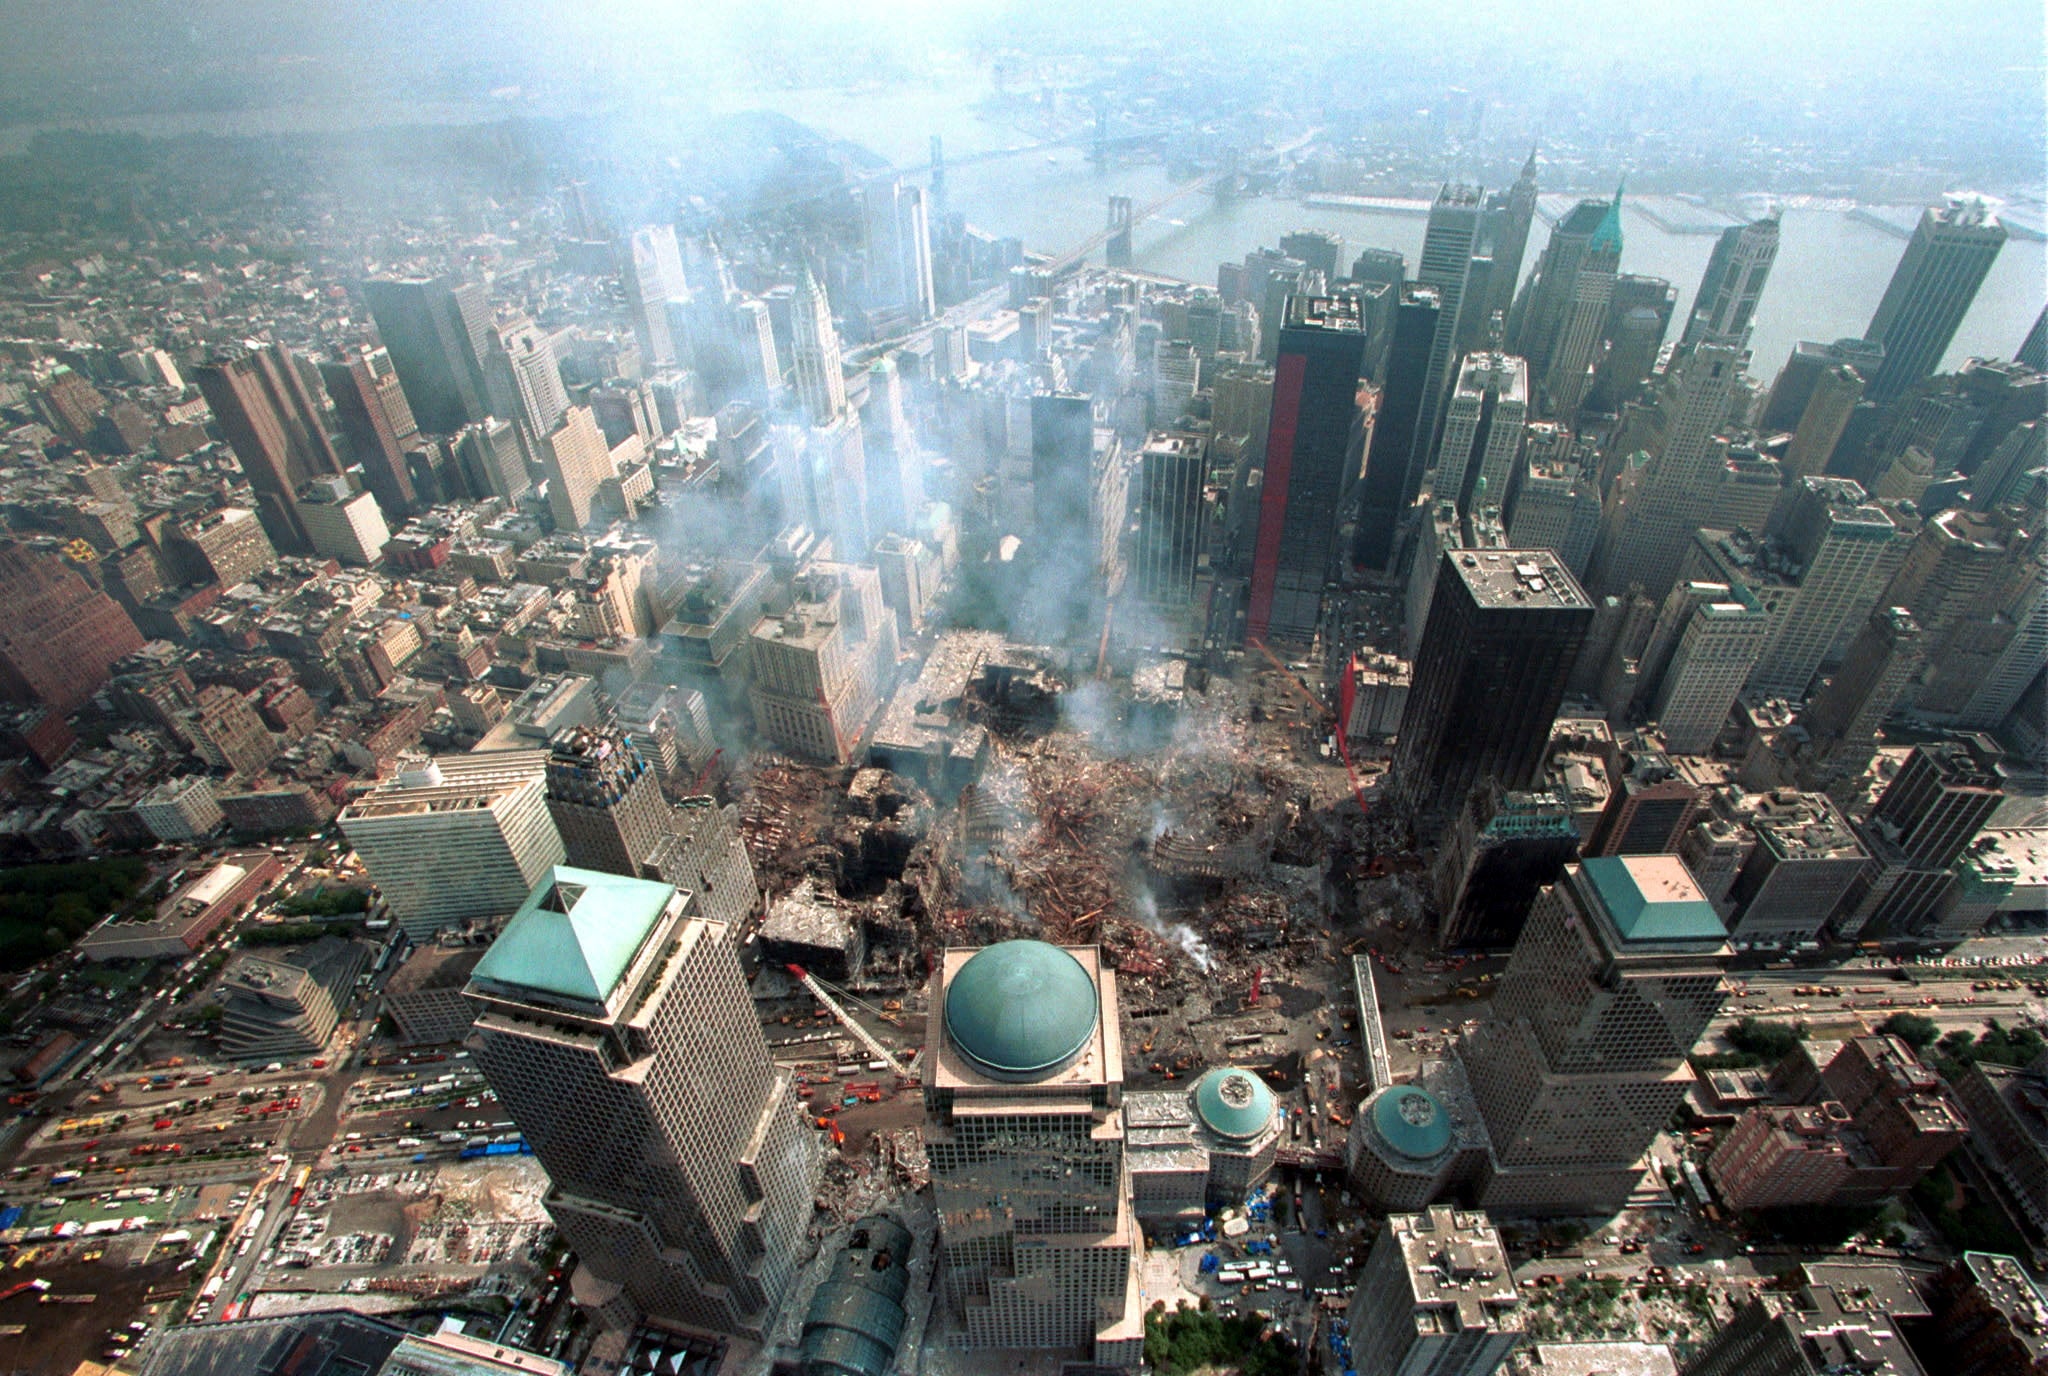 One of the legacies of 9/11 was to give prominence to the idea of the ‘false flag’ attack